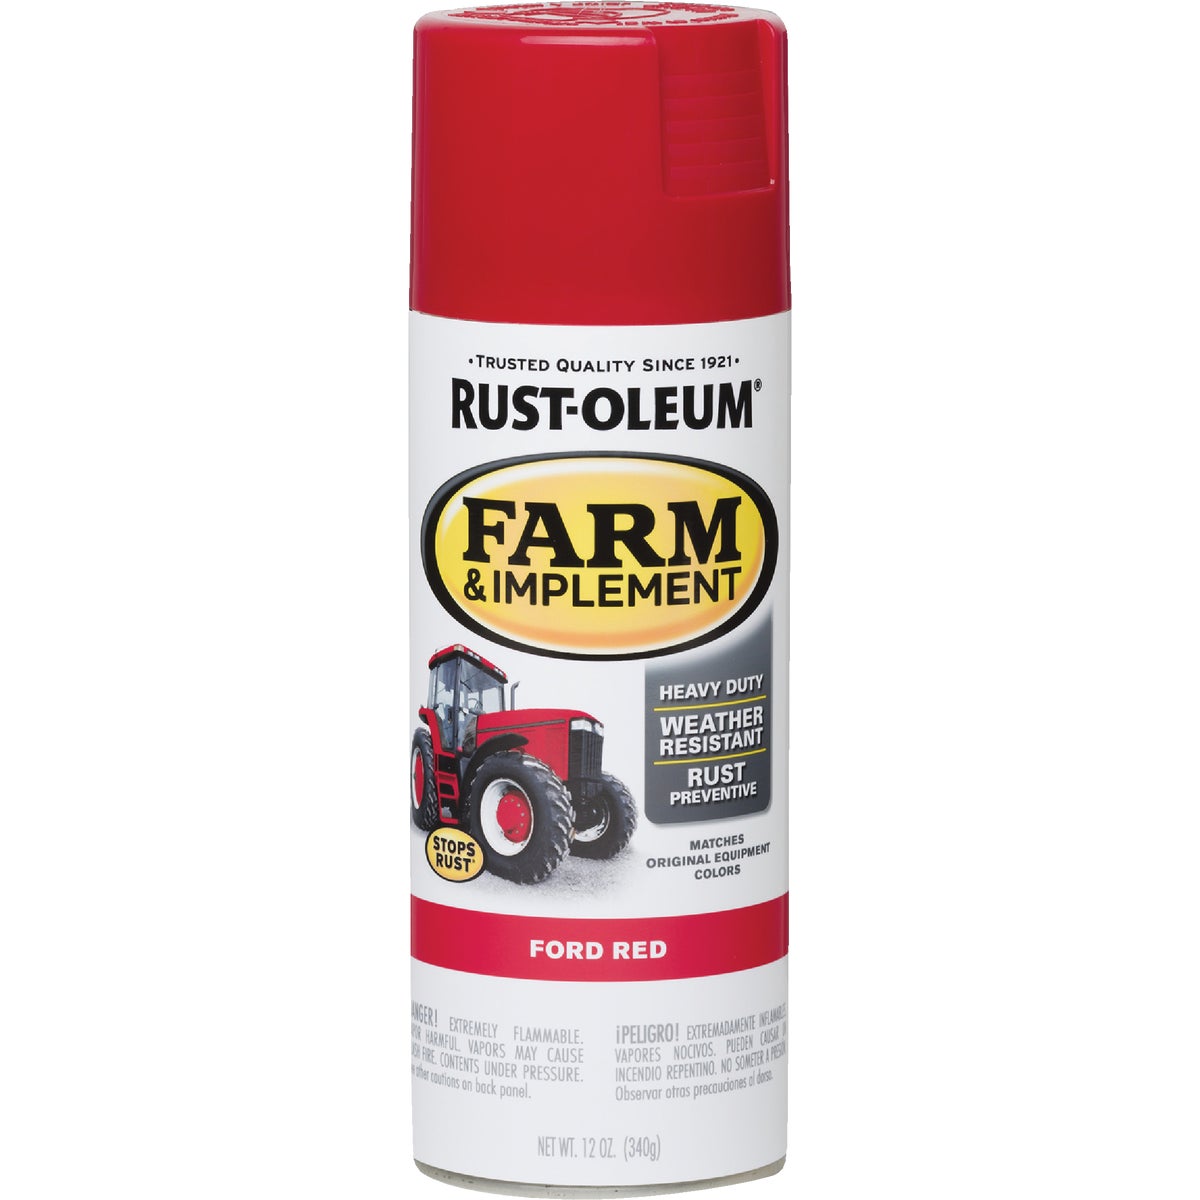 Rust-Oleum 12 Oz. Ford Red Farm & Implement Spray Paint